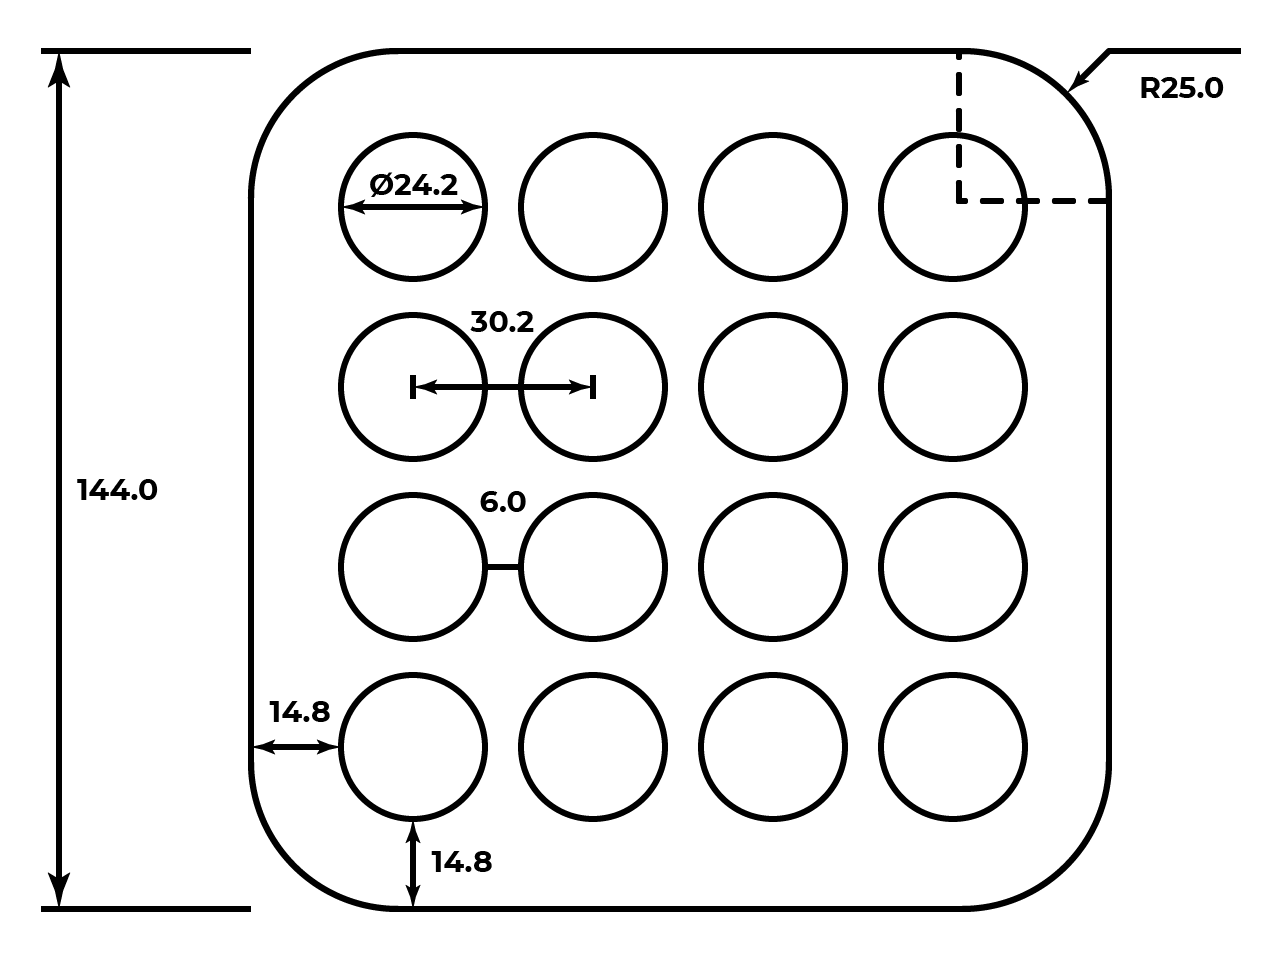 A diagram with the dimensions of the case